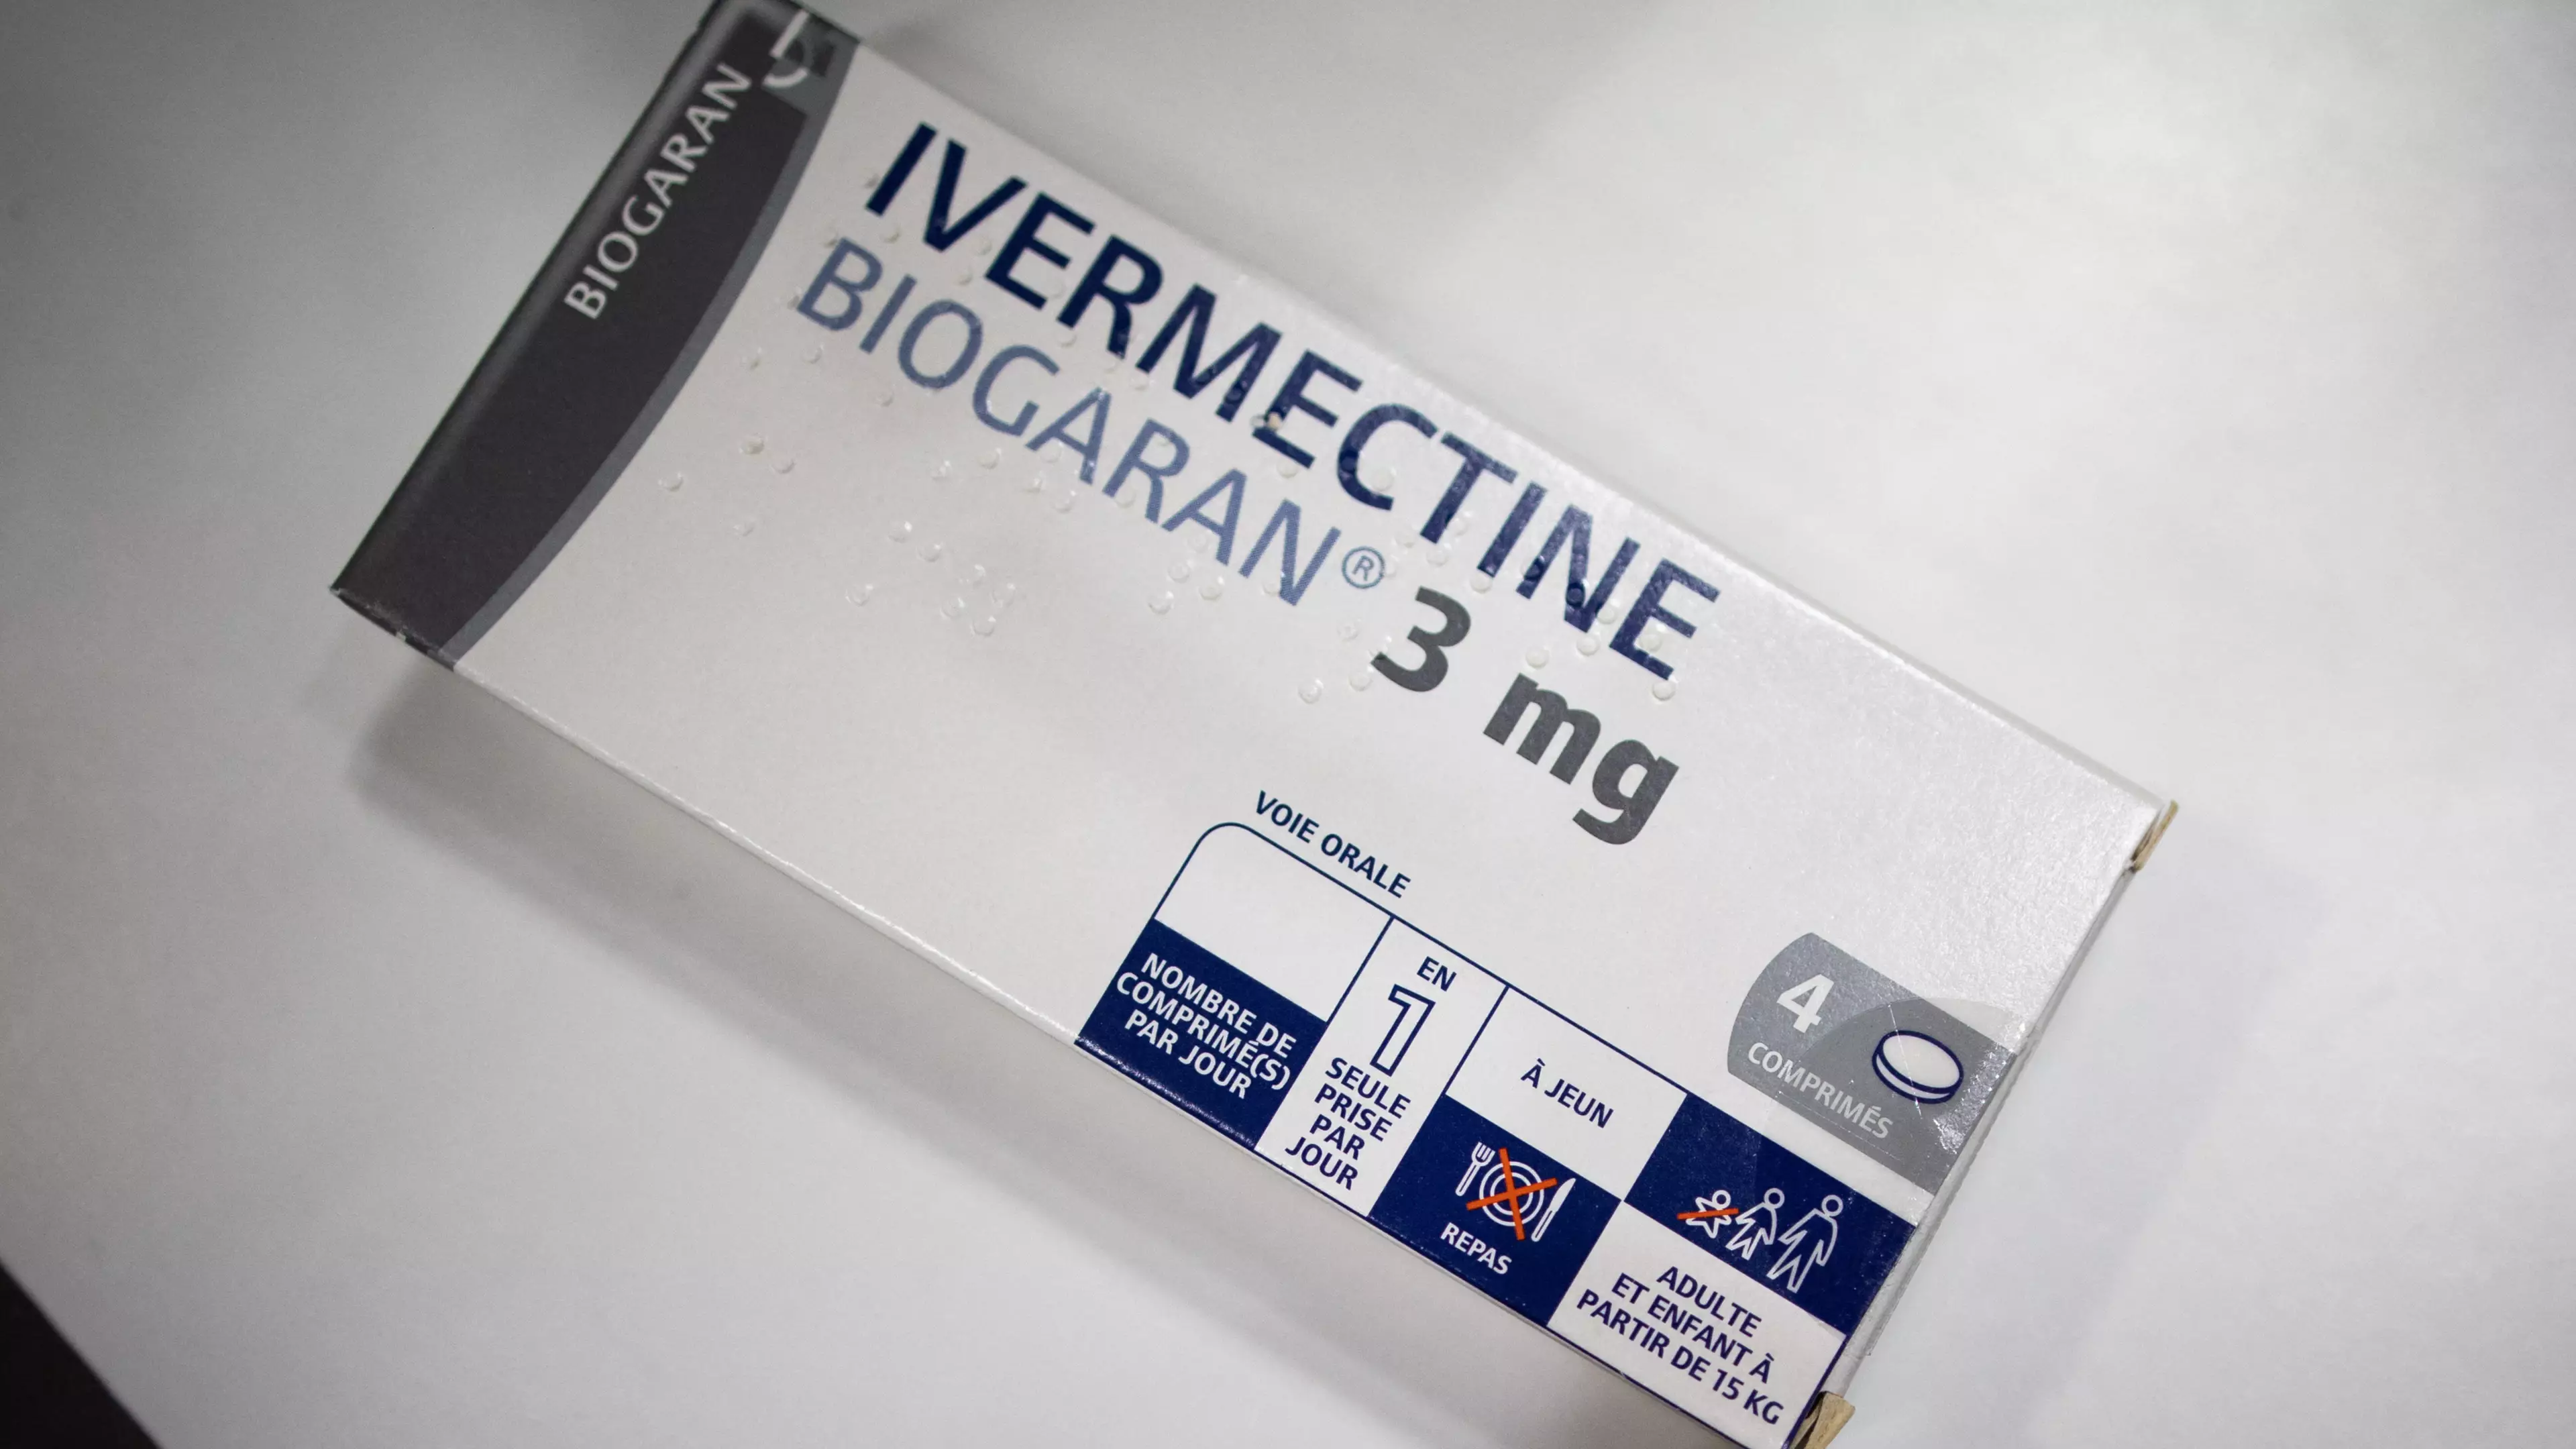 Sydney Man Lucky To Be Alive After Overdosing On Ivermectin